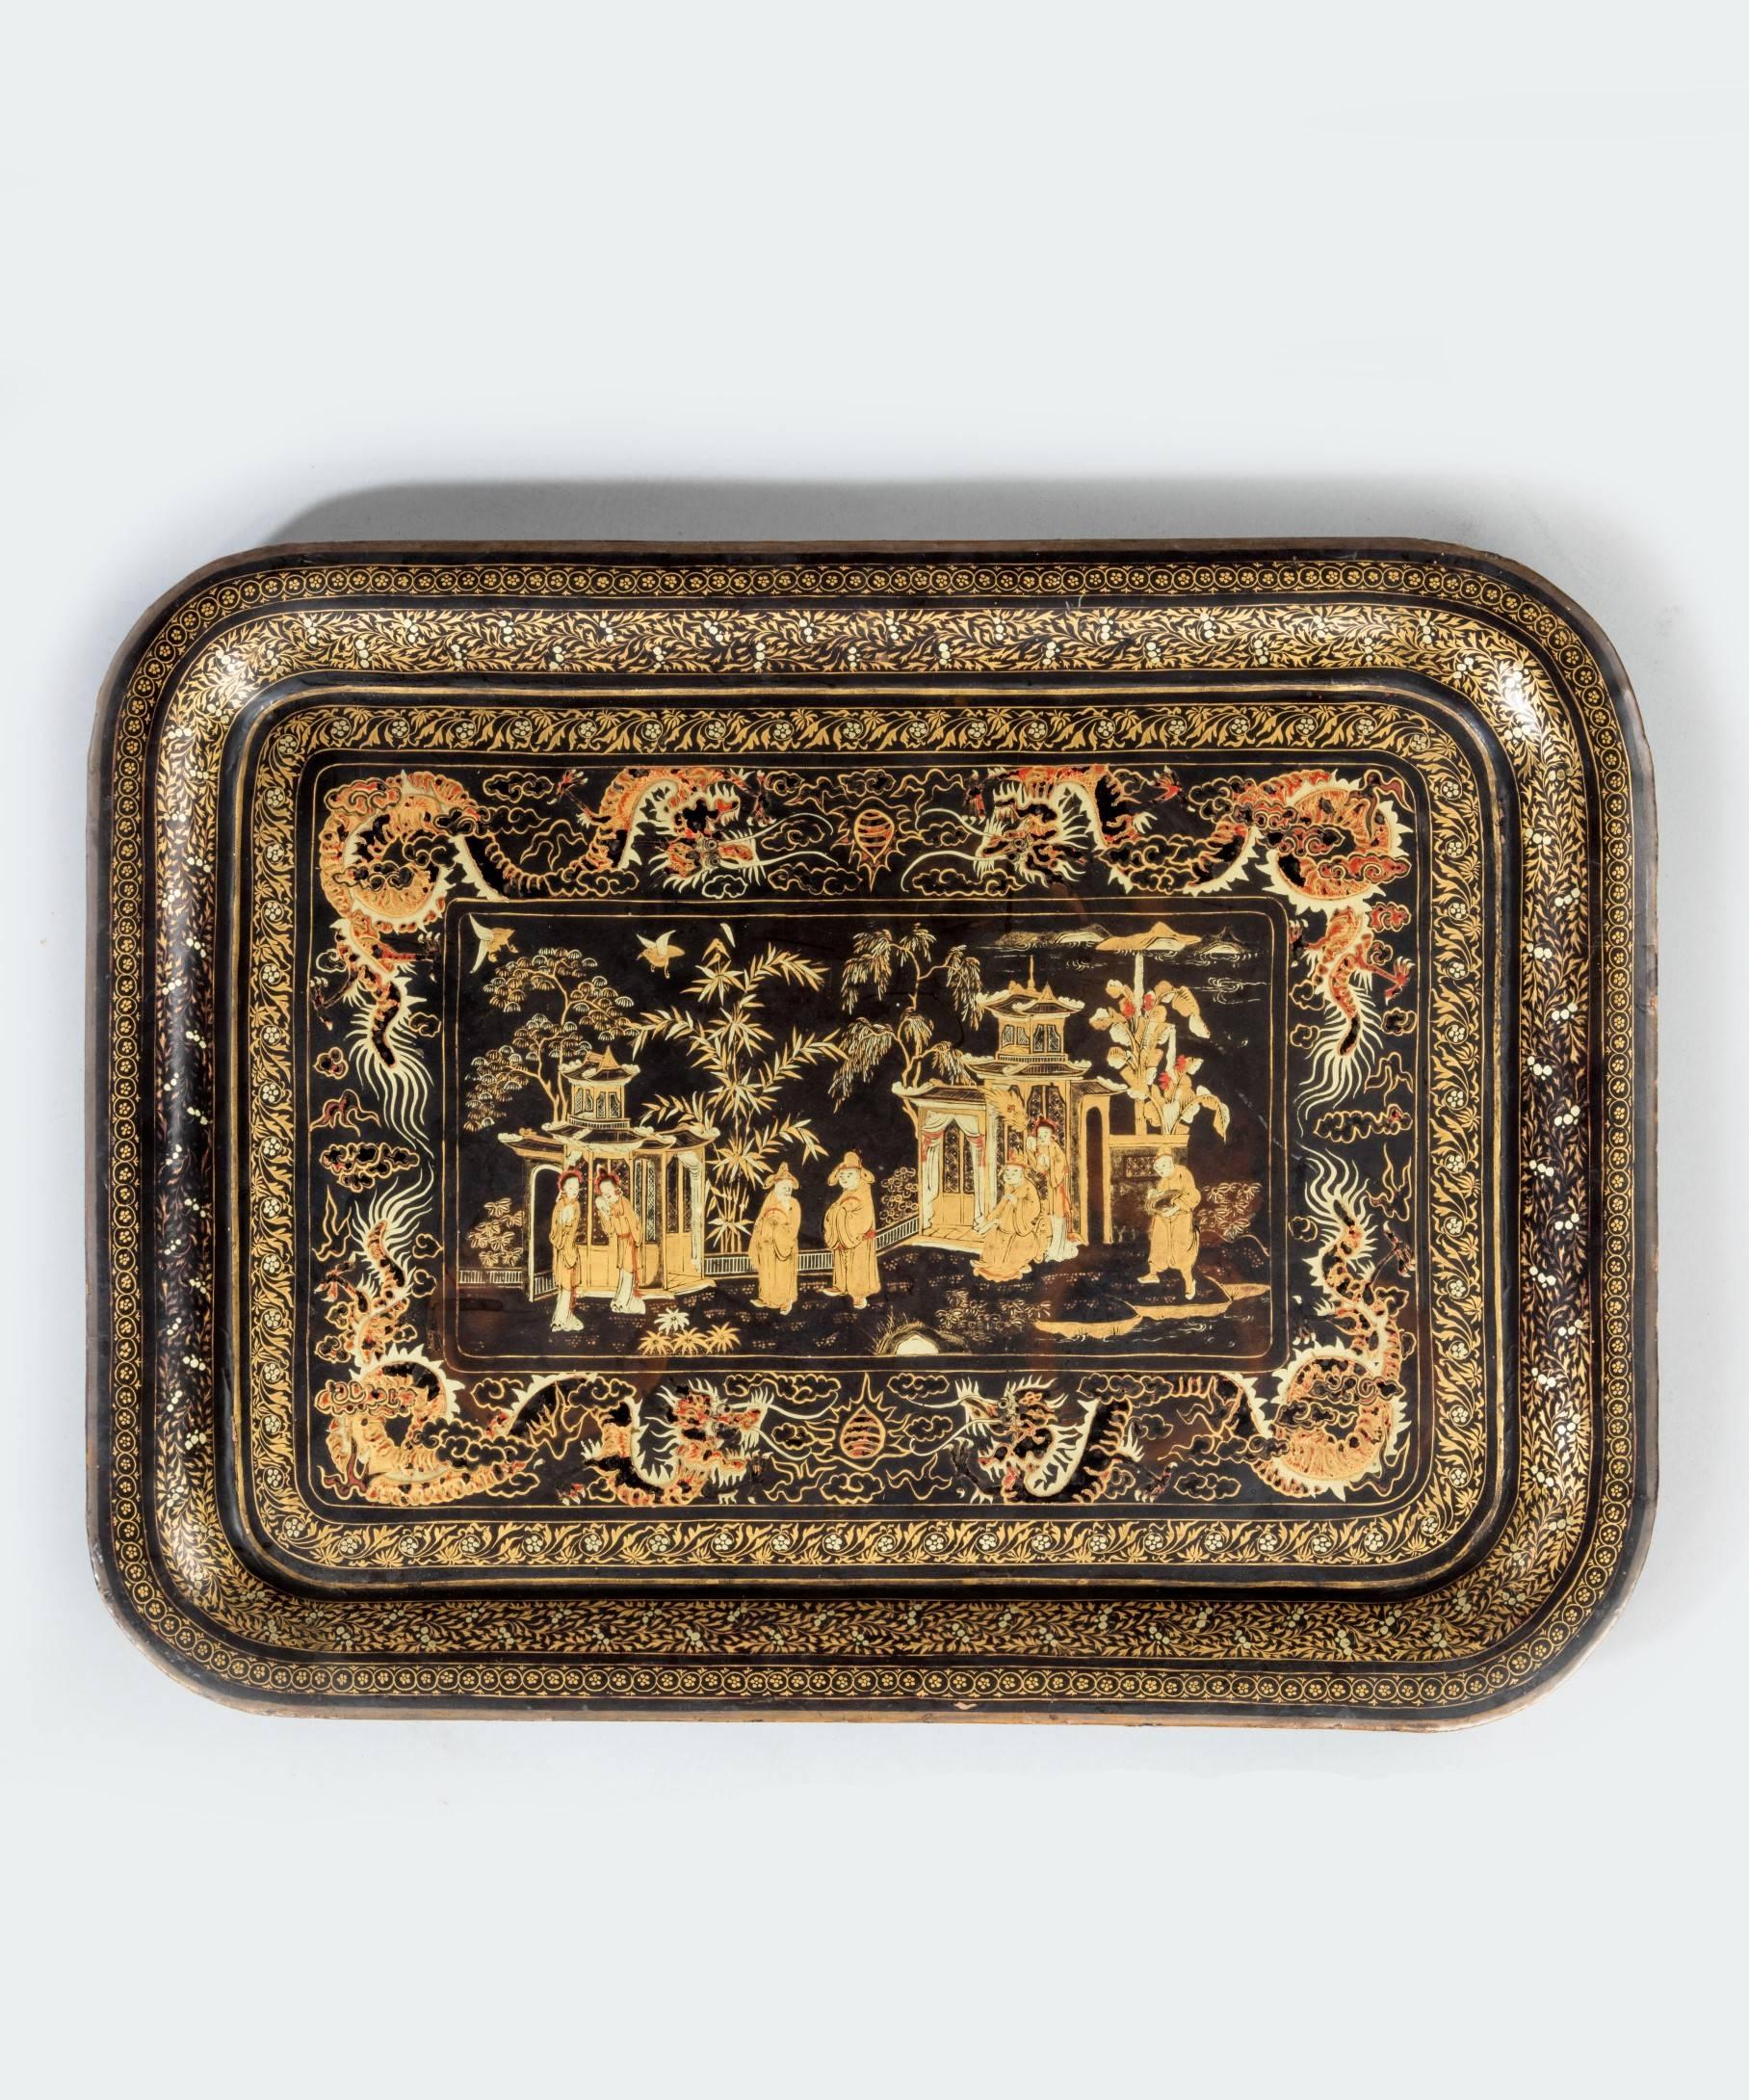 Painted Set of Chinese Export Trays